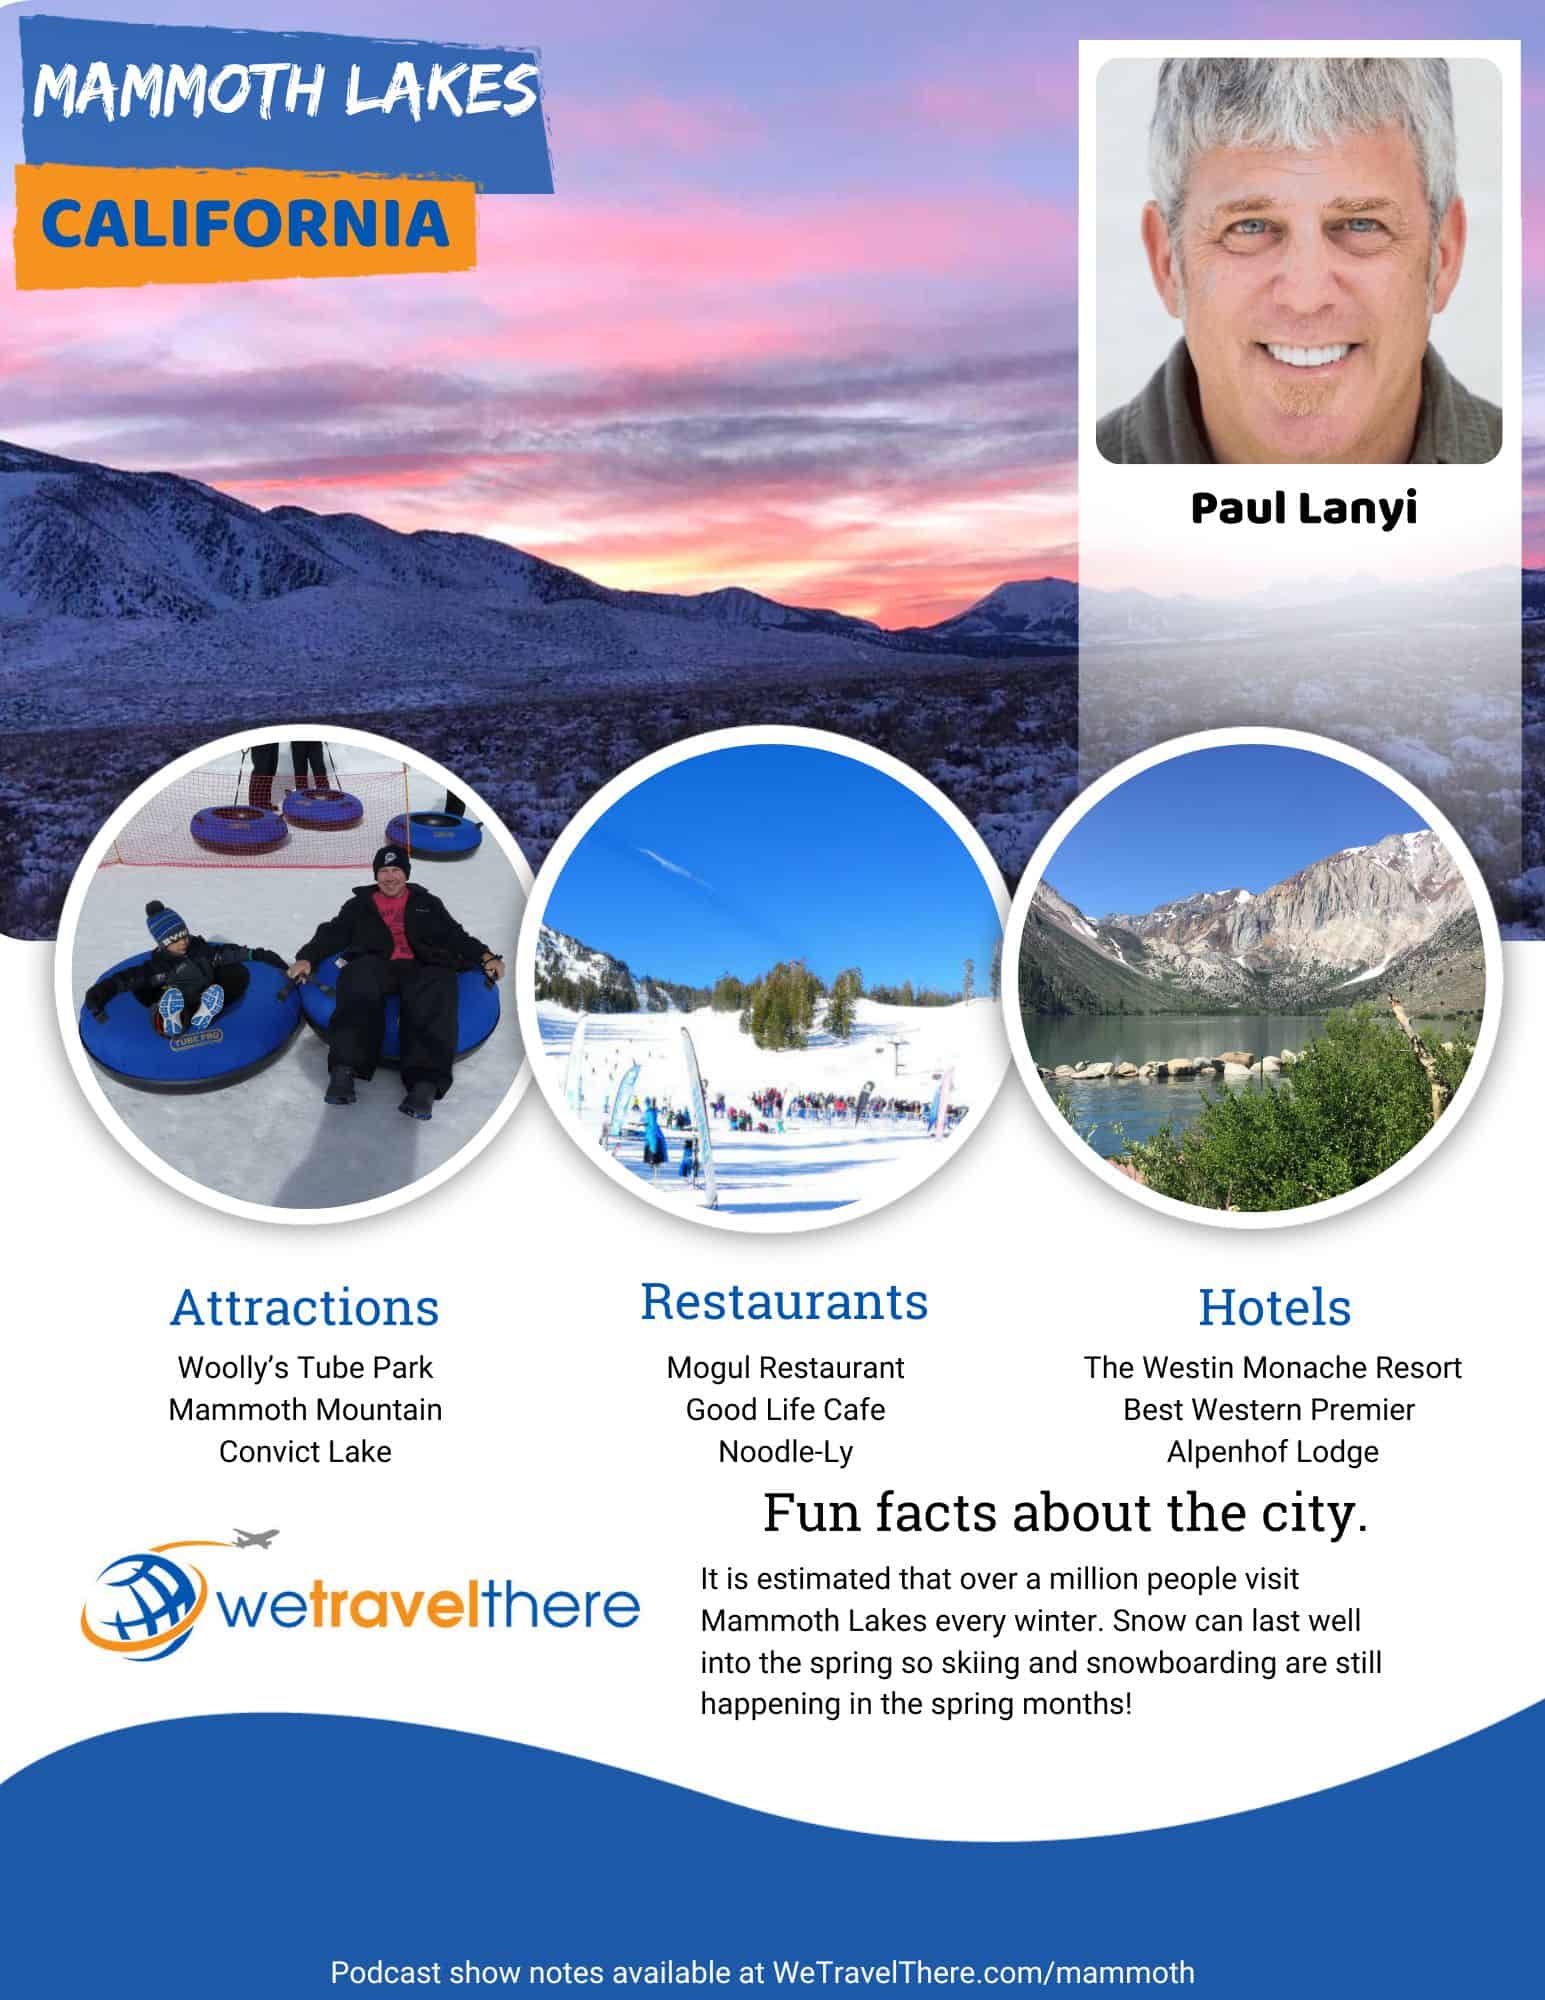 We-Travel-There-Mammoth-Lakes-California-Paul-Lanyi-podcast-one-sheet